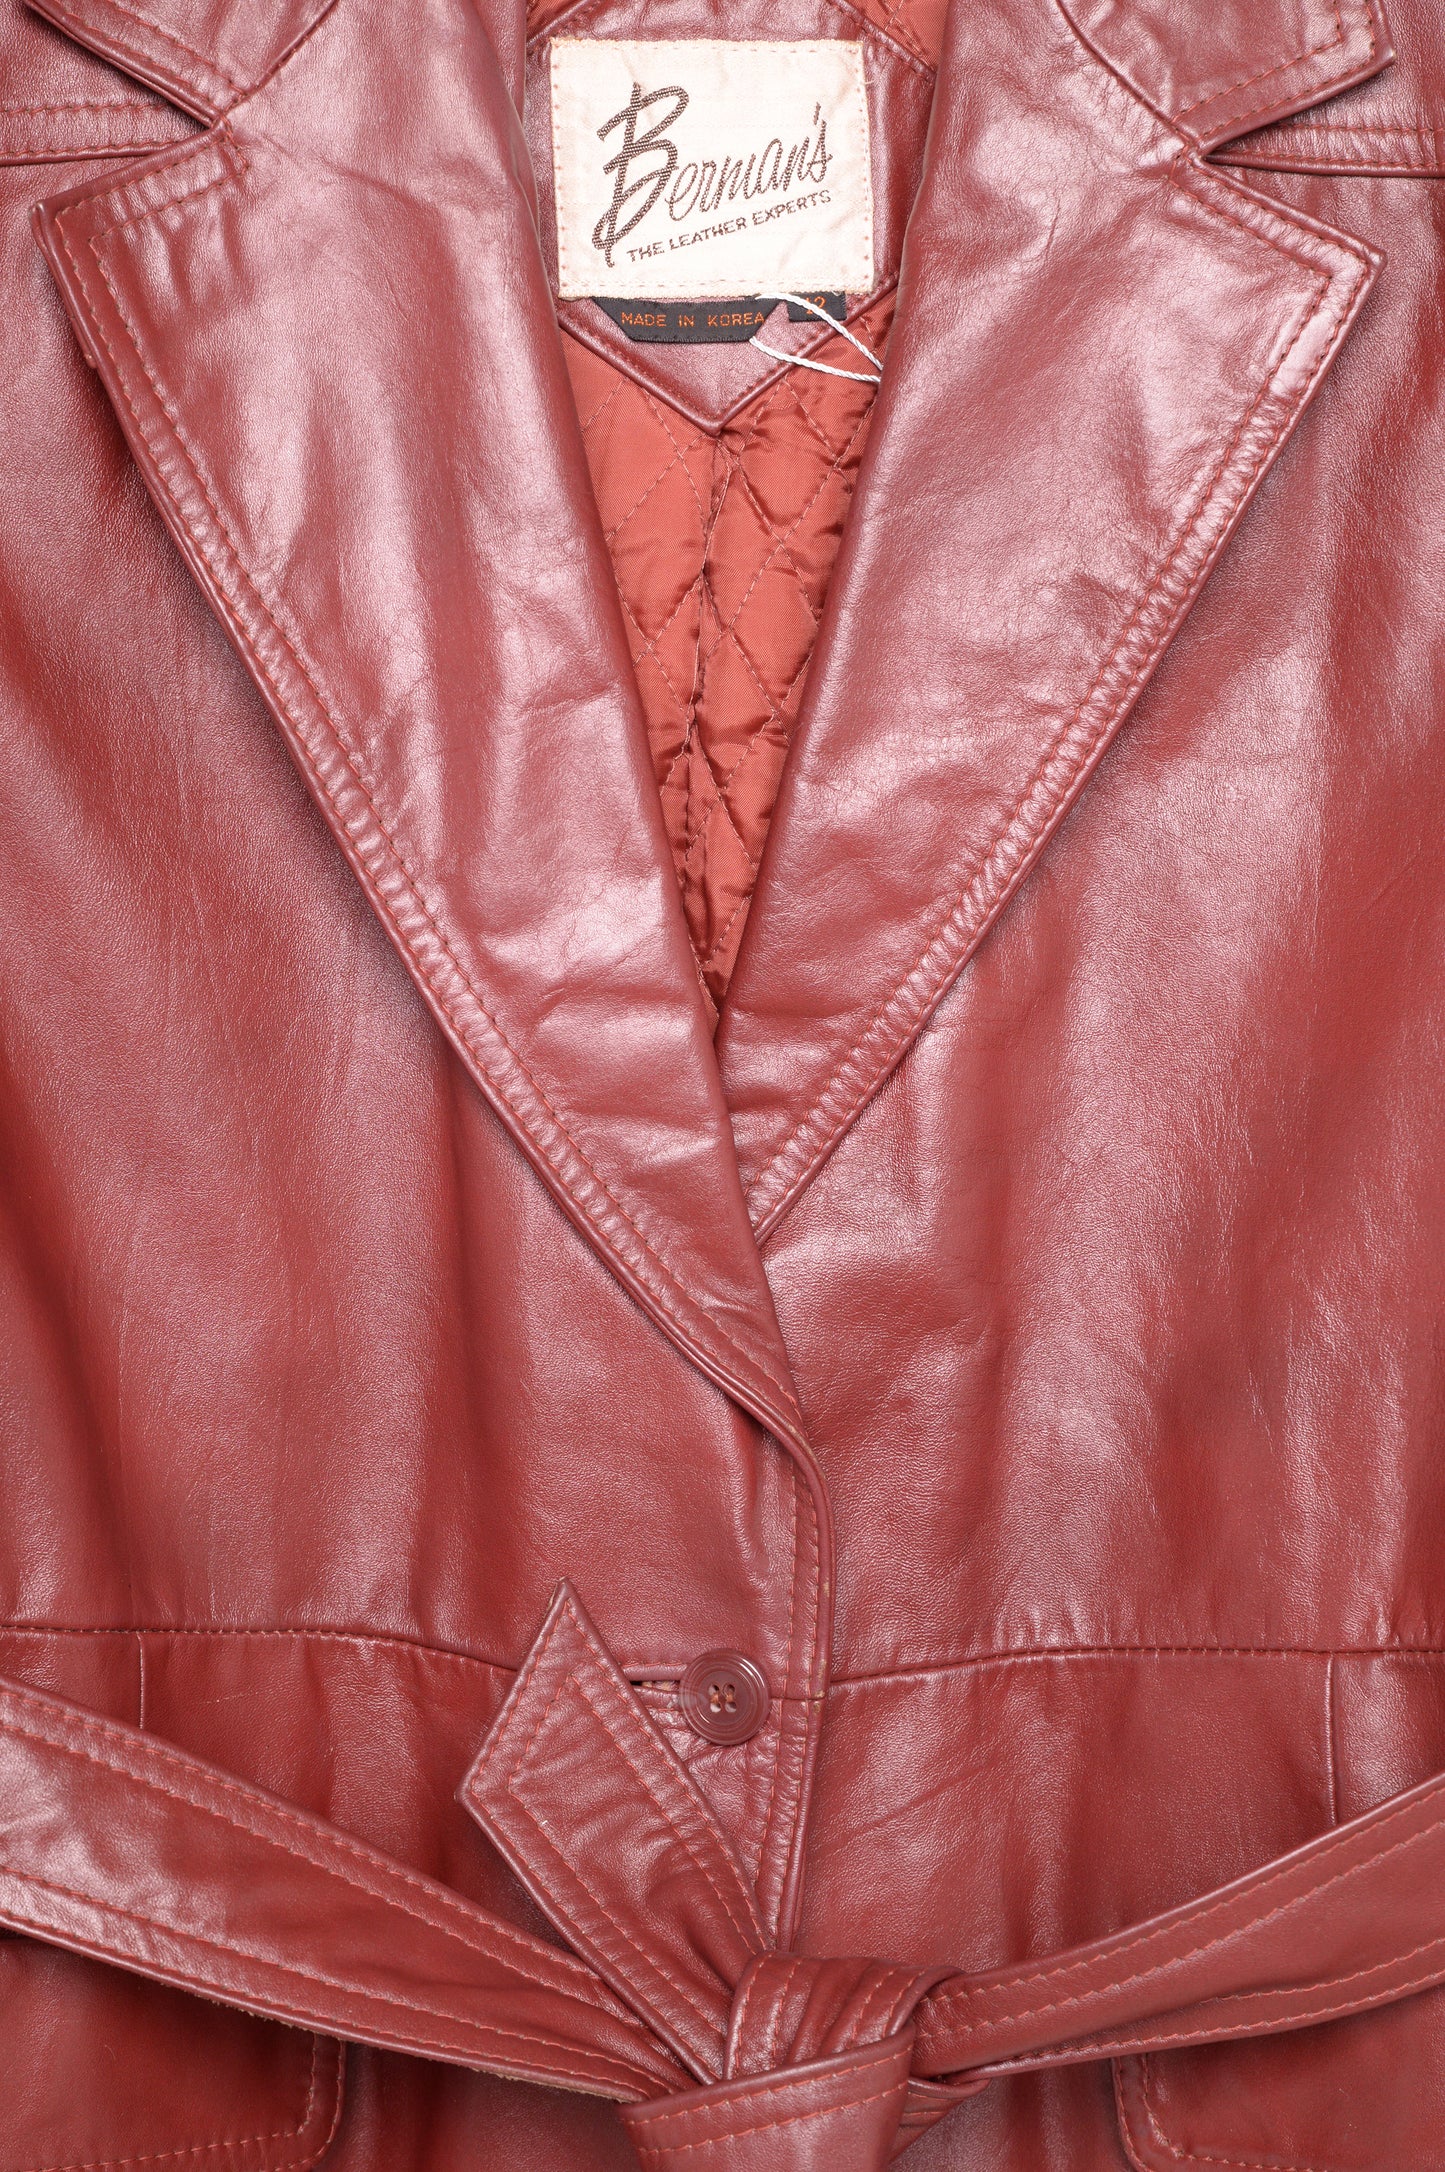 1980s Berman's Belted Leather Jacket